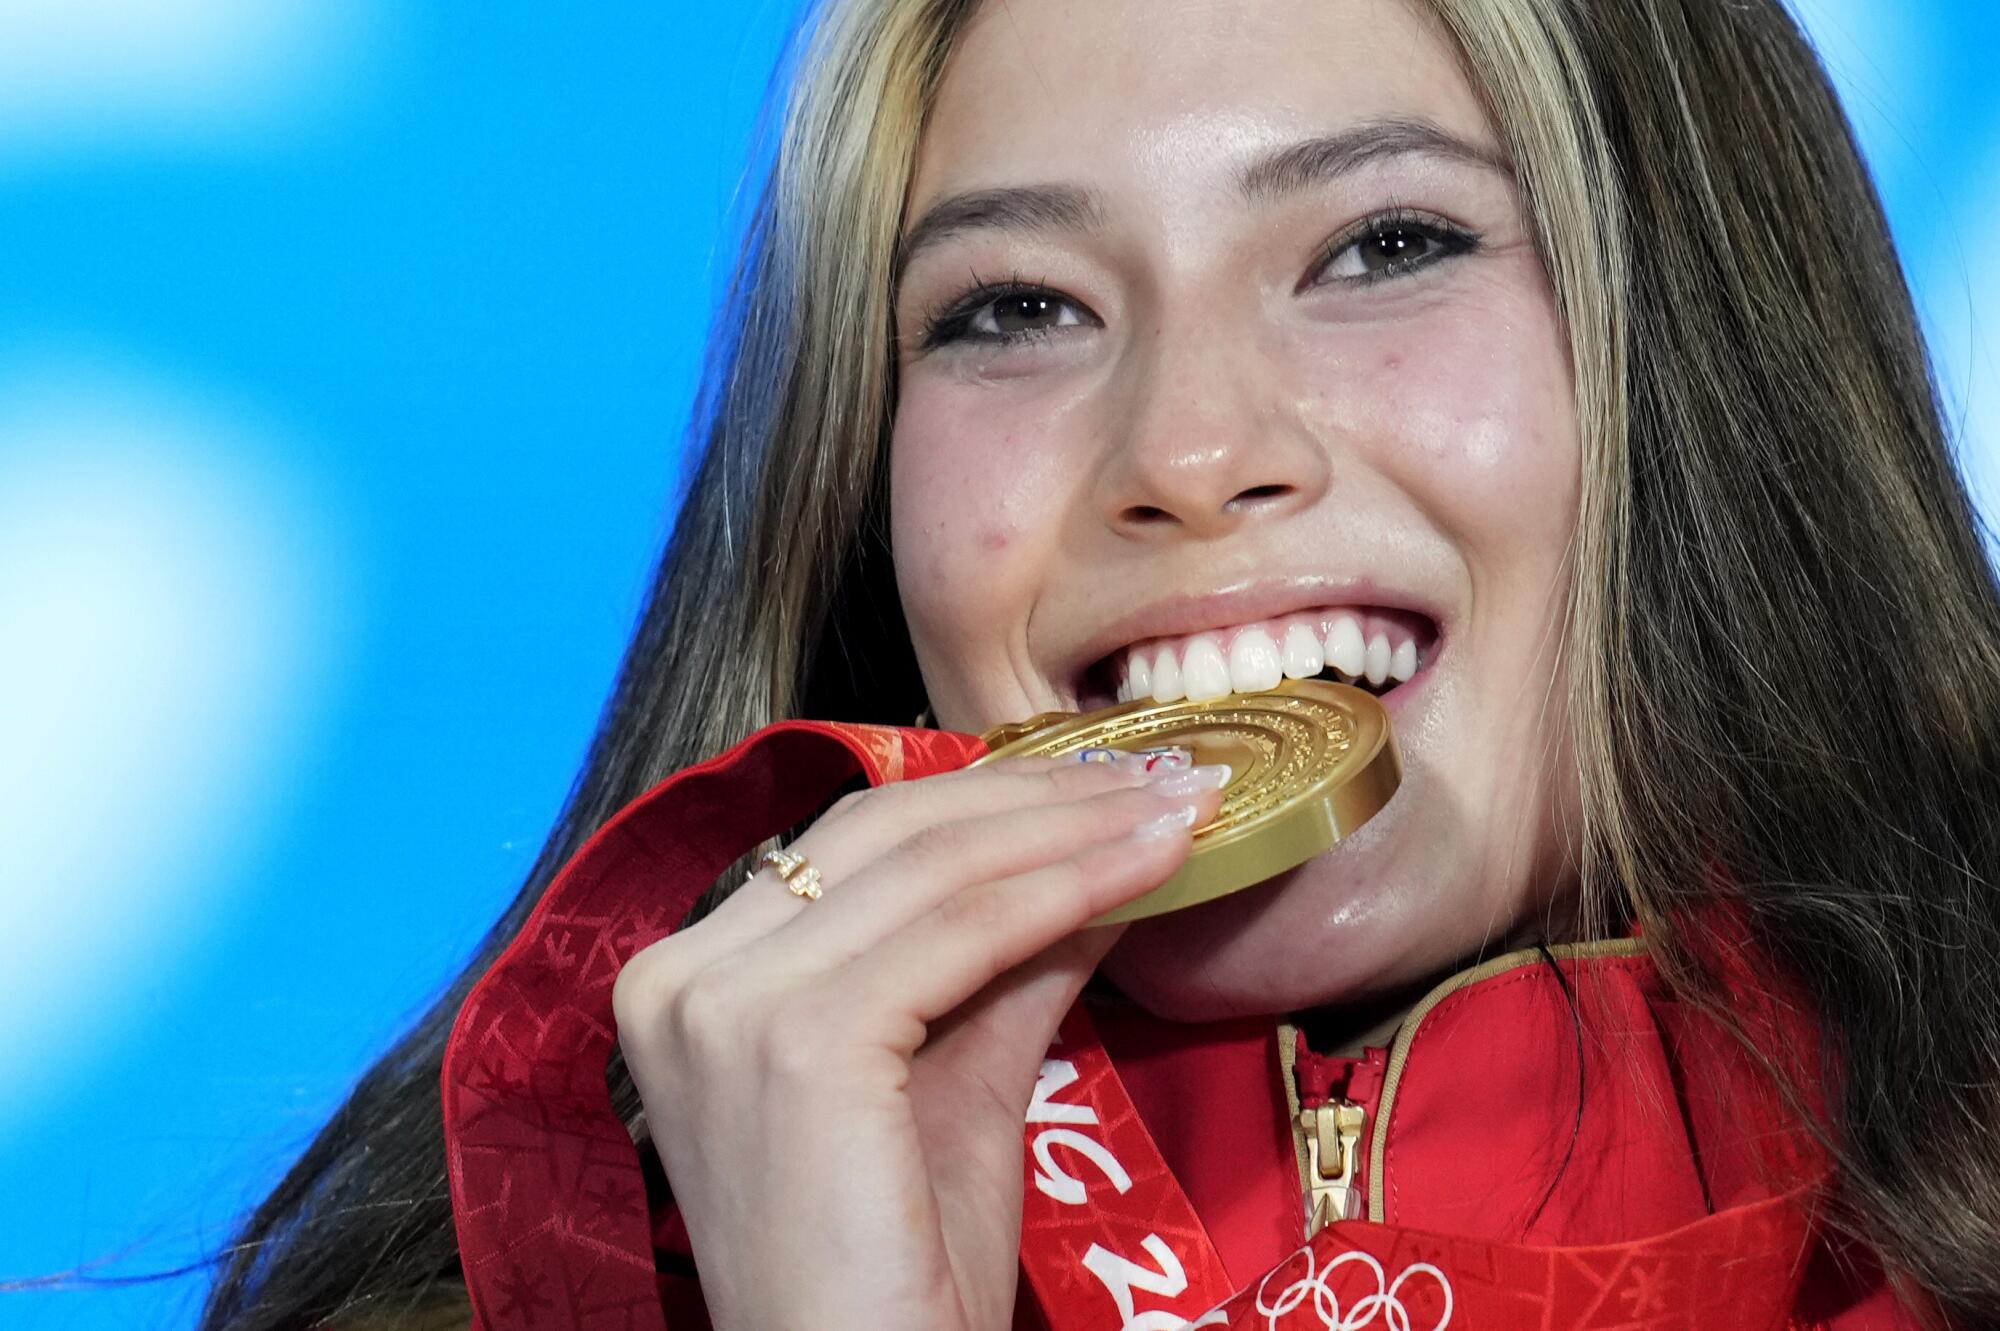 Born And Raised In America, Ski Athlete Eileen Gu Flooded With Riches When  Voting To Represent